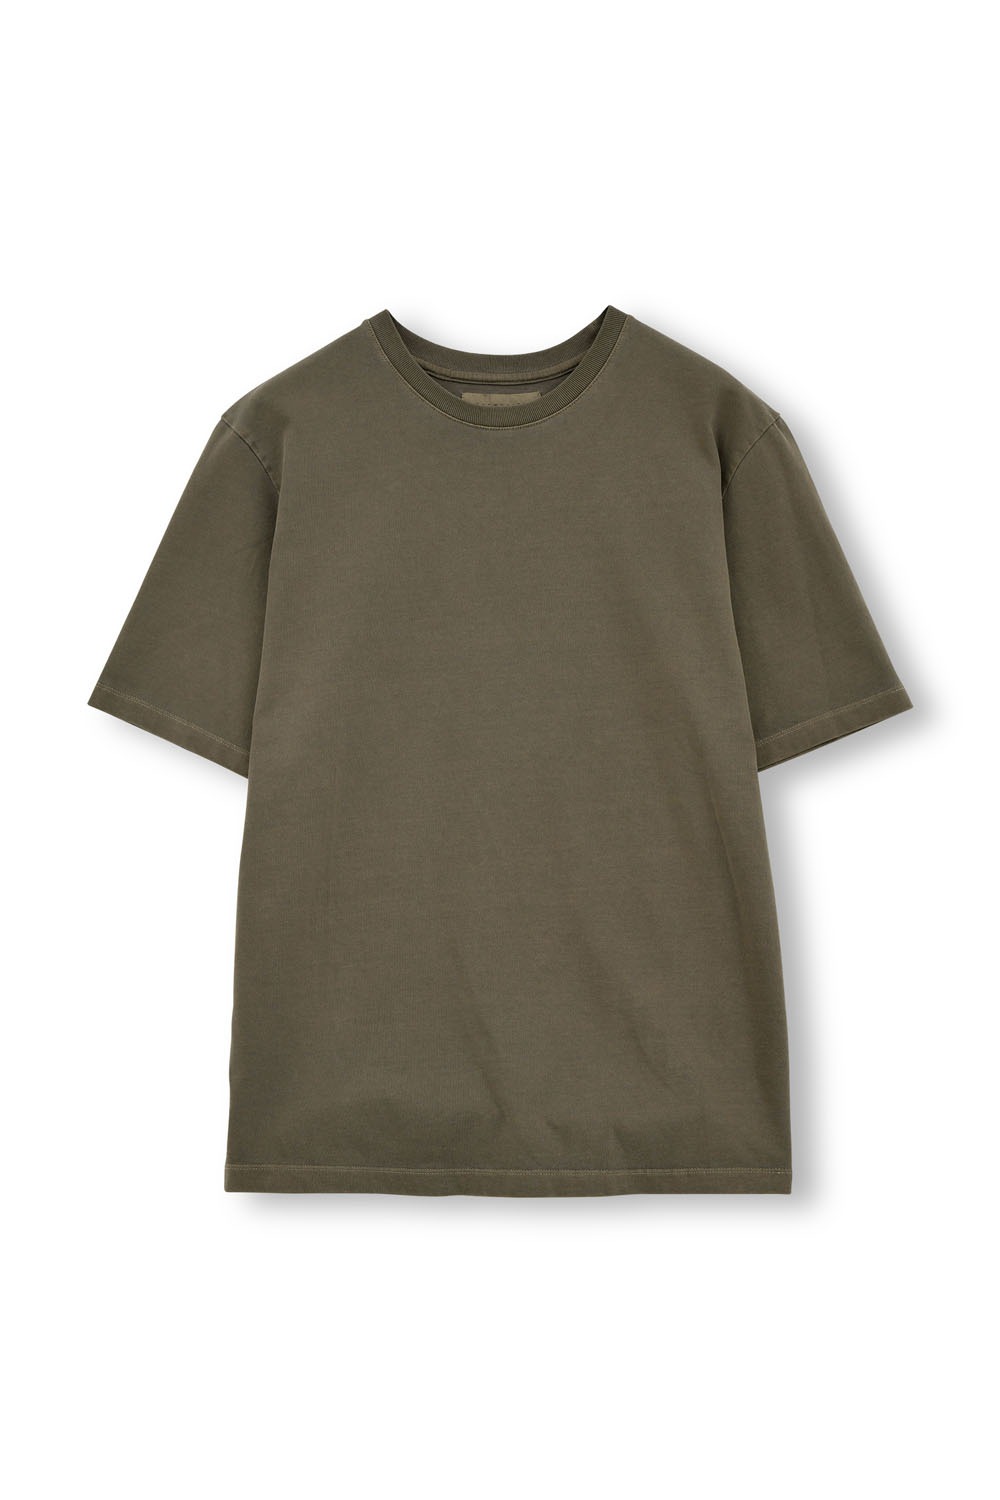 Washed T-Shirt-Washed Brown